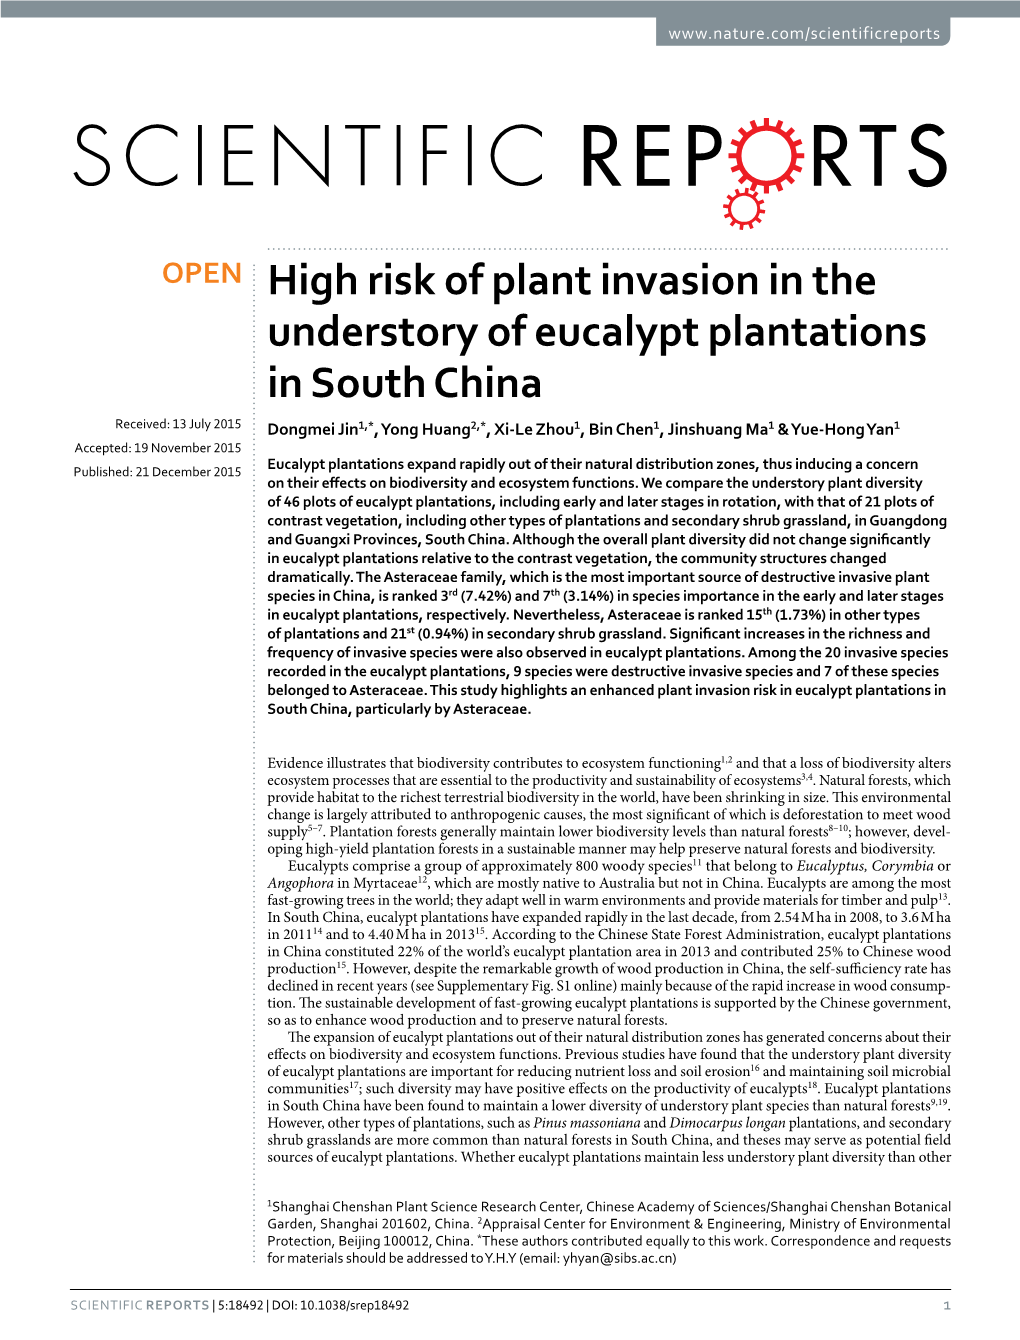 High Risk of Plant Invasion in the Understory of Eucalypt Plantations